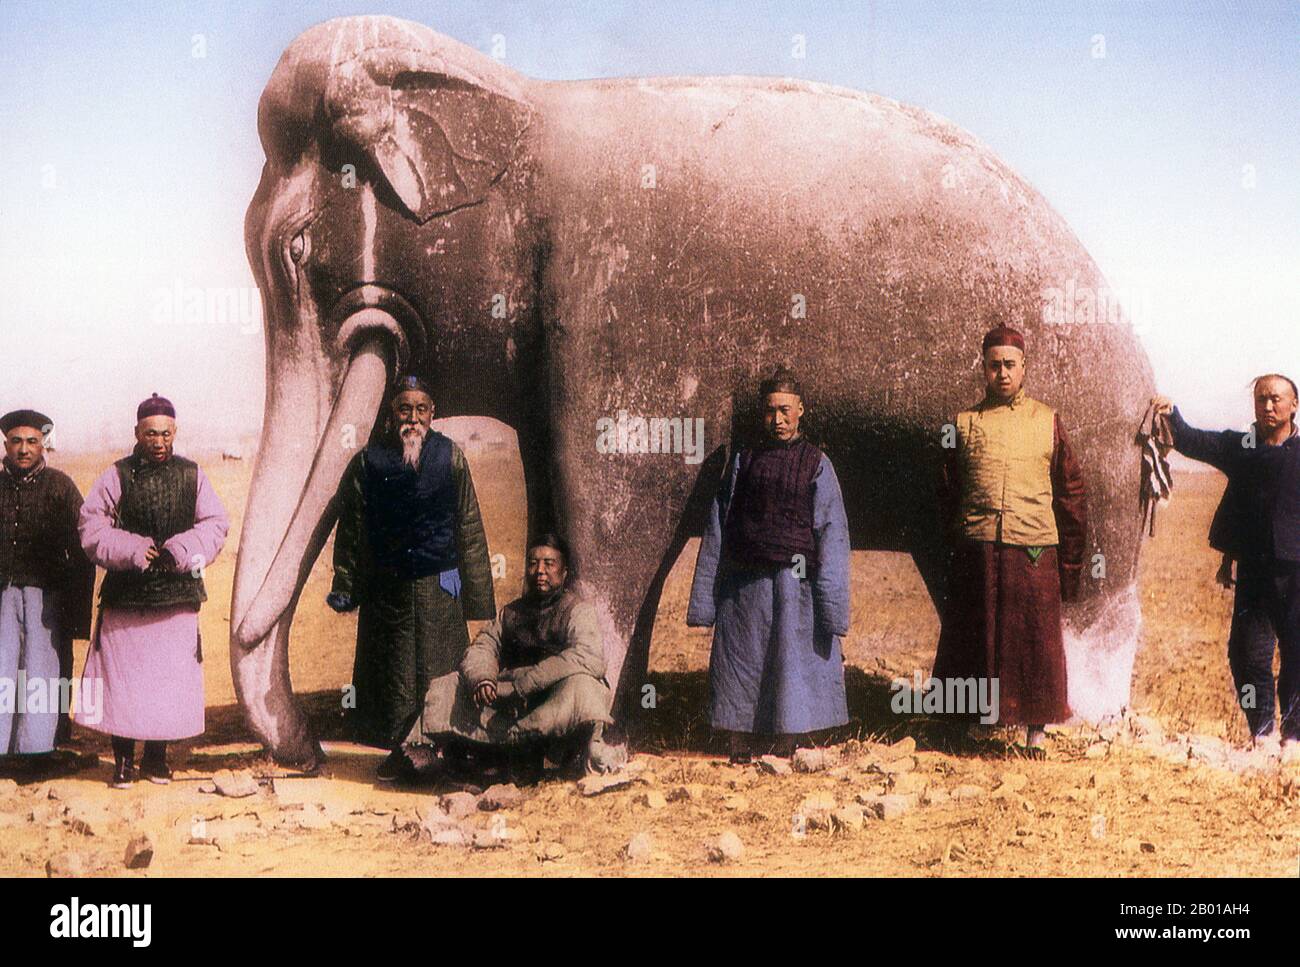 China: A group of well-to-do Chinese men posing in front of a stone elephant at the Ming Dynasty Tombs, 1872.  The Ming Dynasty Tombs ( Míng shísān líng; lit. Thirteen Tombs of the Ming Dynasty) are located some 50 kilometres due north of Beijing. The site was chosen by the third Ming Dynasty emperor Yongle (1402-1424), who moved the capital of China from Nanjing to the present location of Beijing.  Yongle is credited with envisioning the layout of the ancient city of Beijing as well as a number of landmarks and monuments located therein. Stock Photo